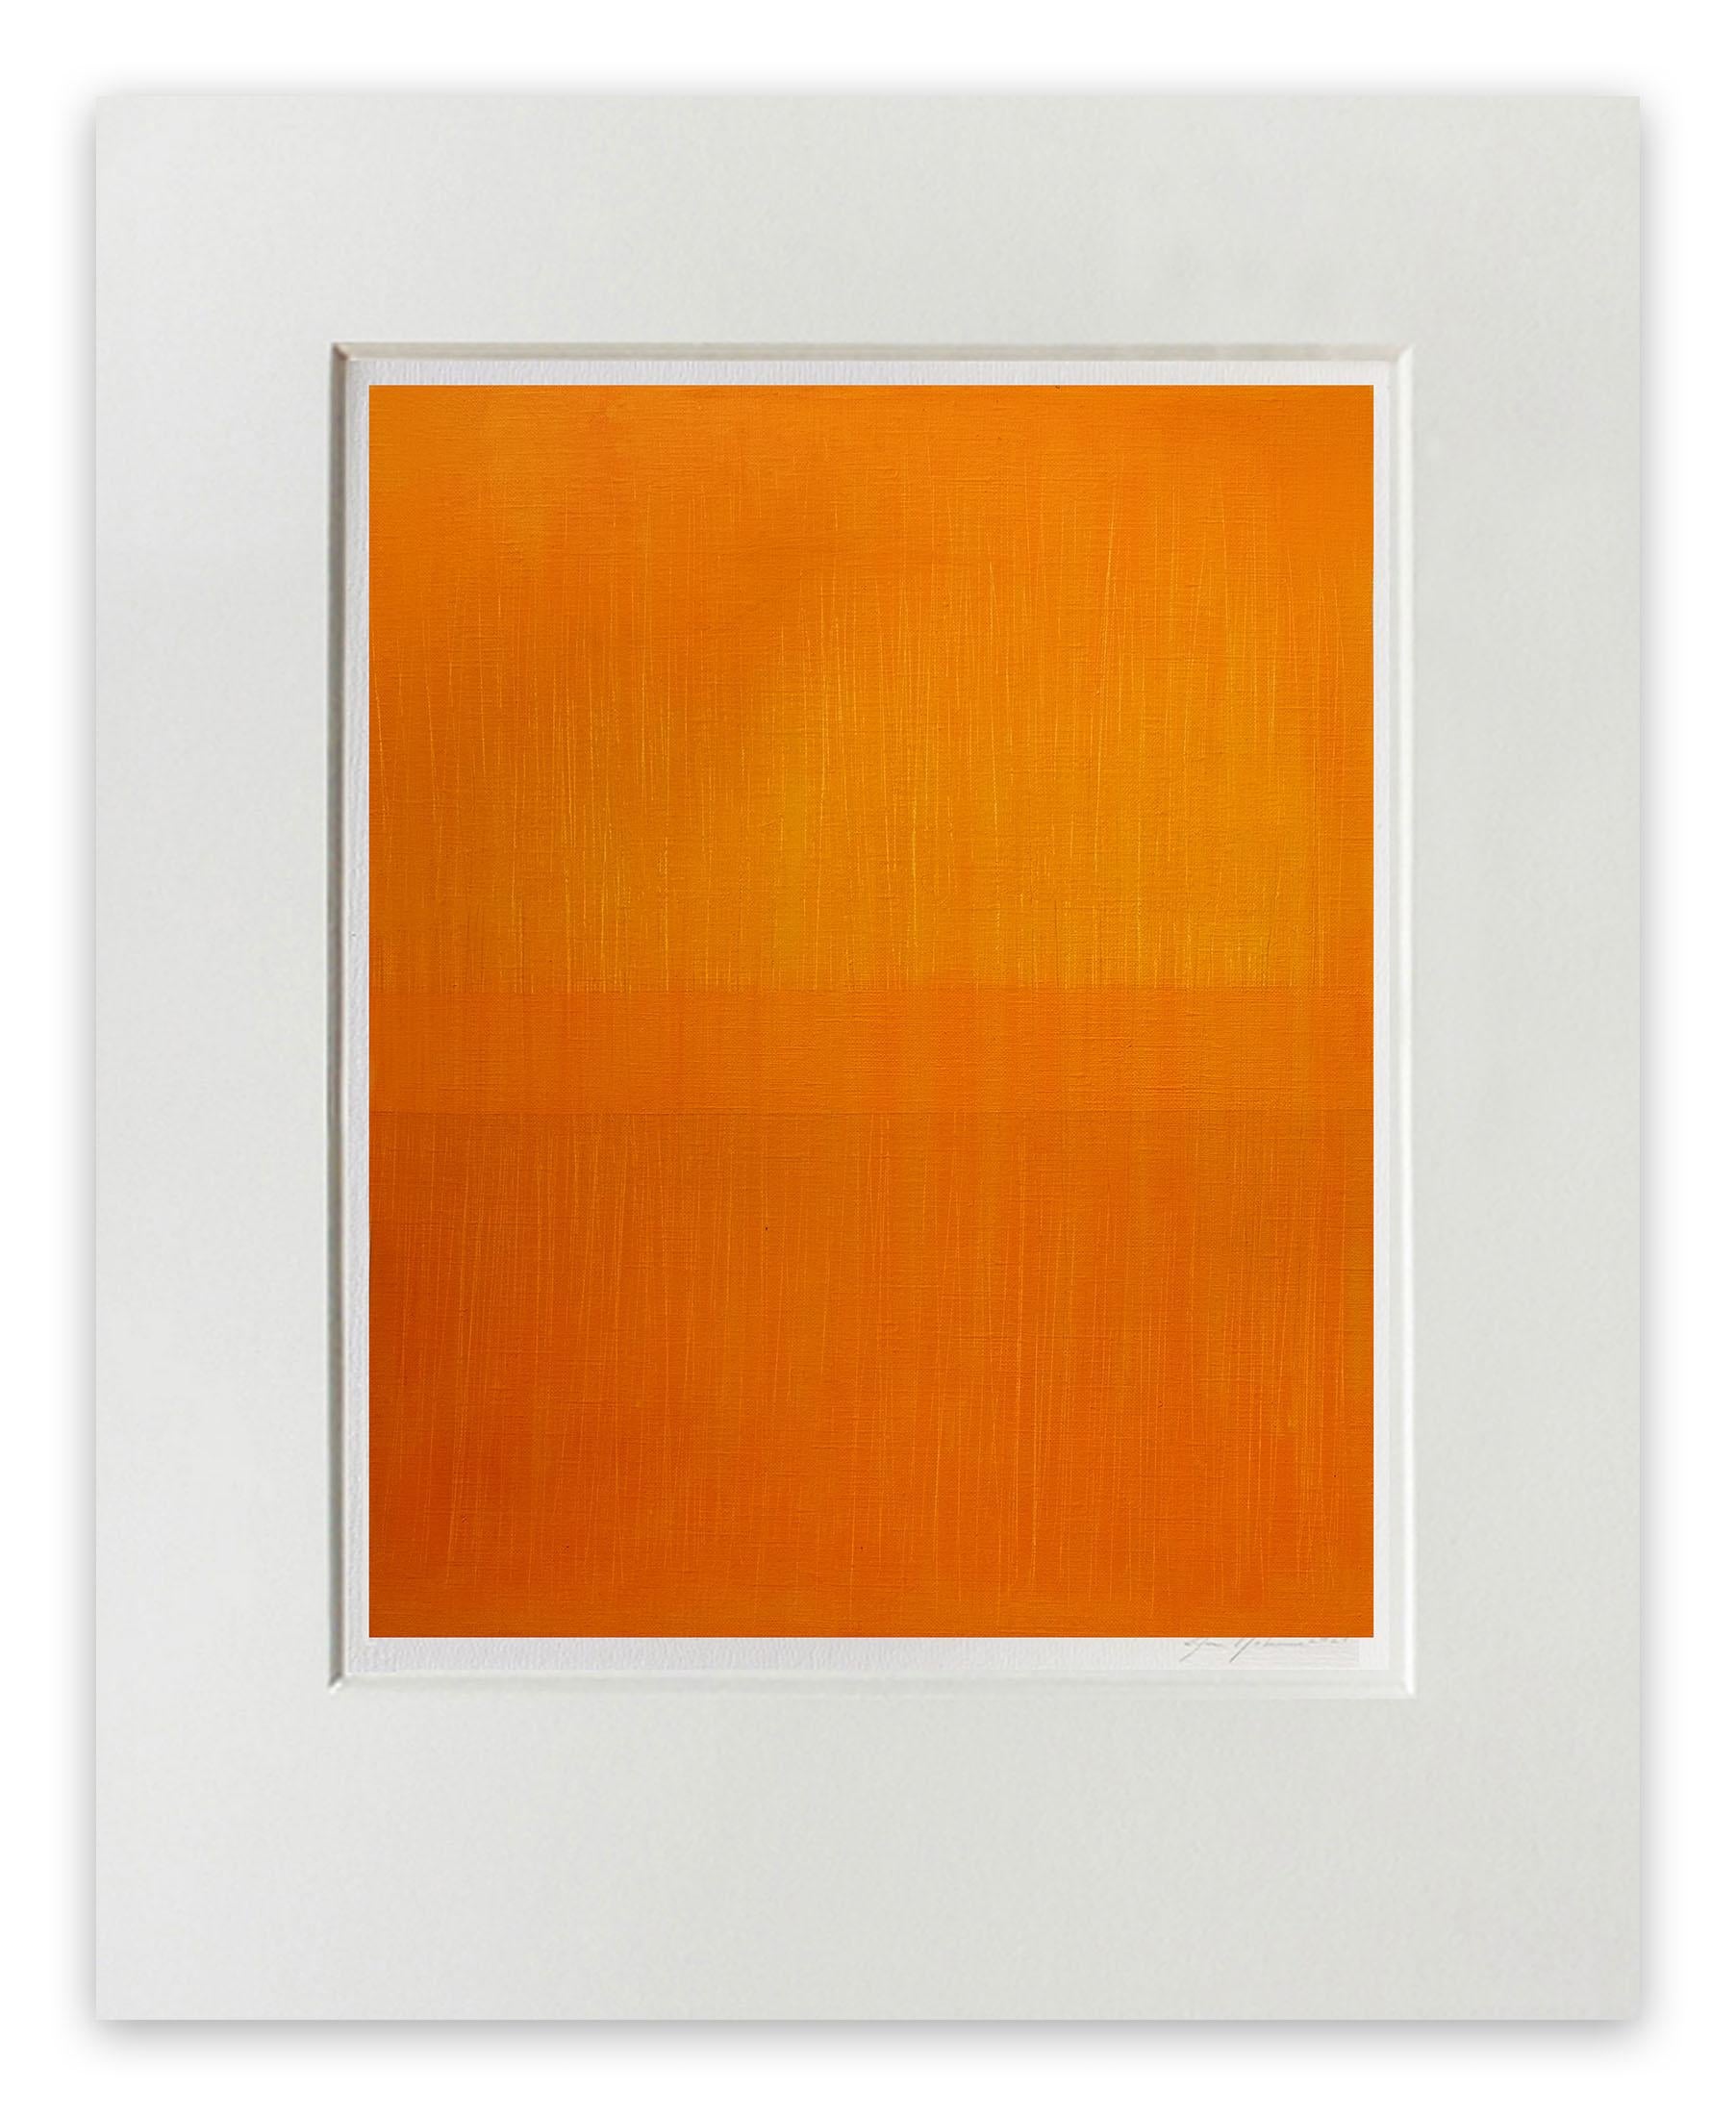 Linear Zest (Abstract Painting)

Cold wax and oil stick on canvas paper - Unframed

The work is matted, image size is 40 x 32 cm / 15.7 x 12.2 in

Within the minimalist construct, these works on paper explore the chromatic energy of colour through